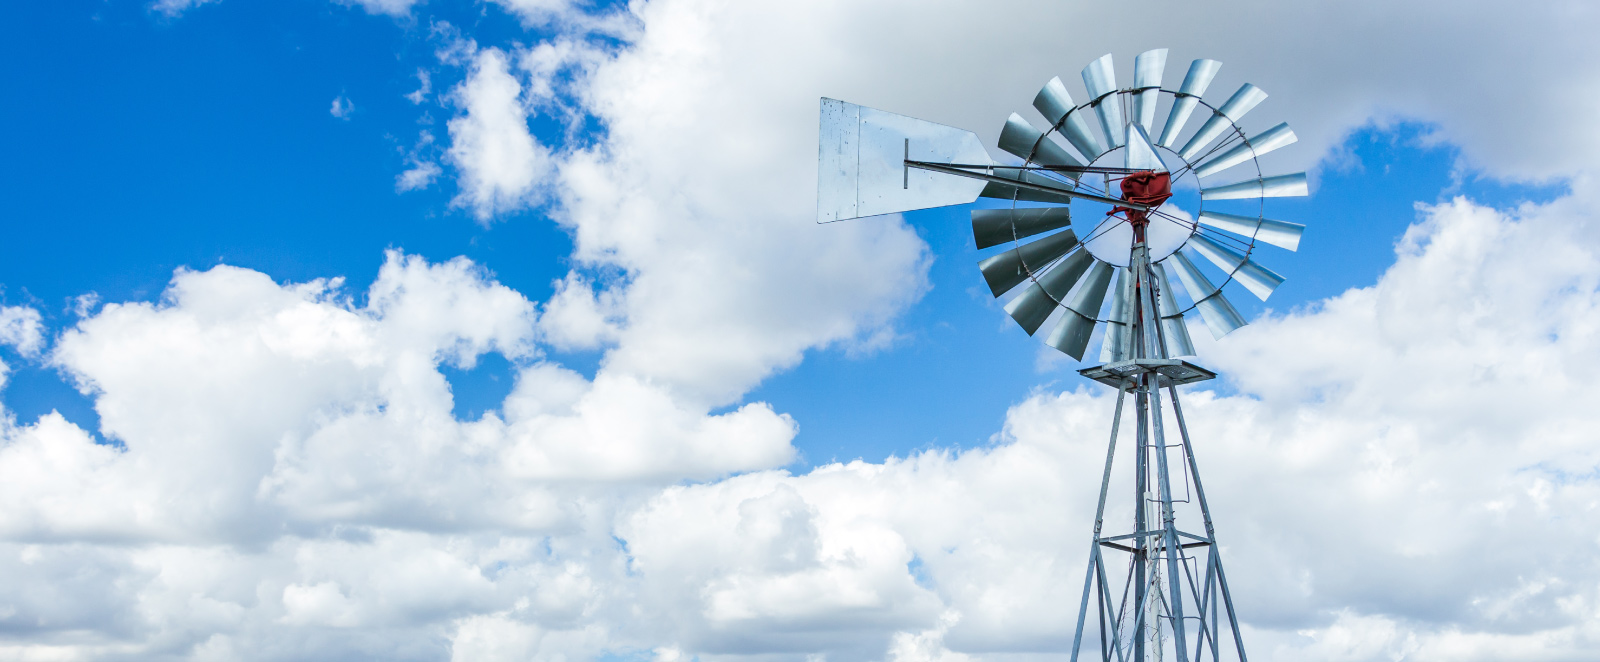 Windmill in front of blue, cloudy skies